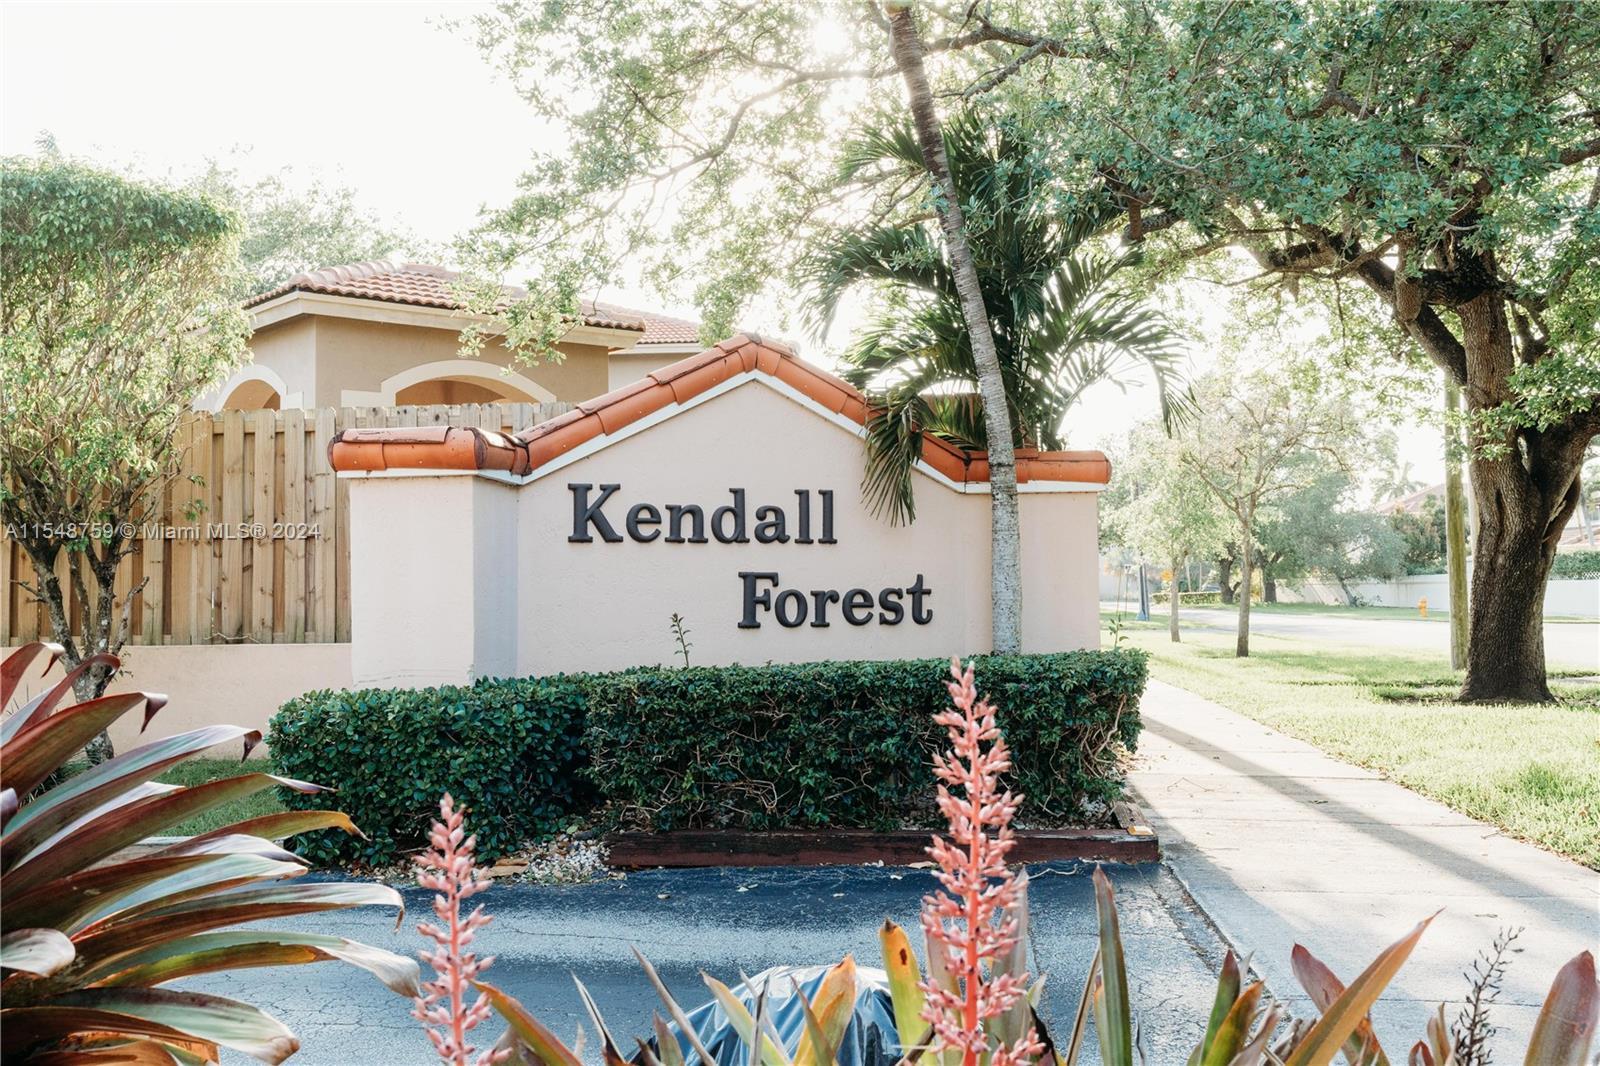 LOCATION! LOCATION! Rarely available 3/2.5 Townhouse-condo in the community of Kendall Forests. This